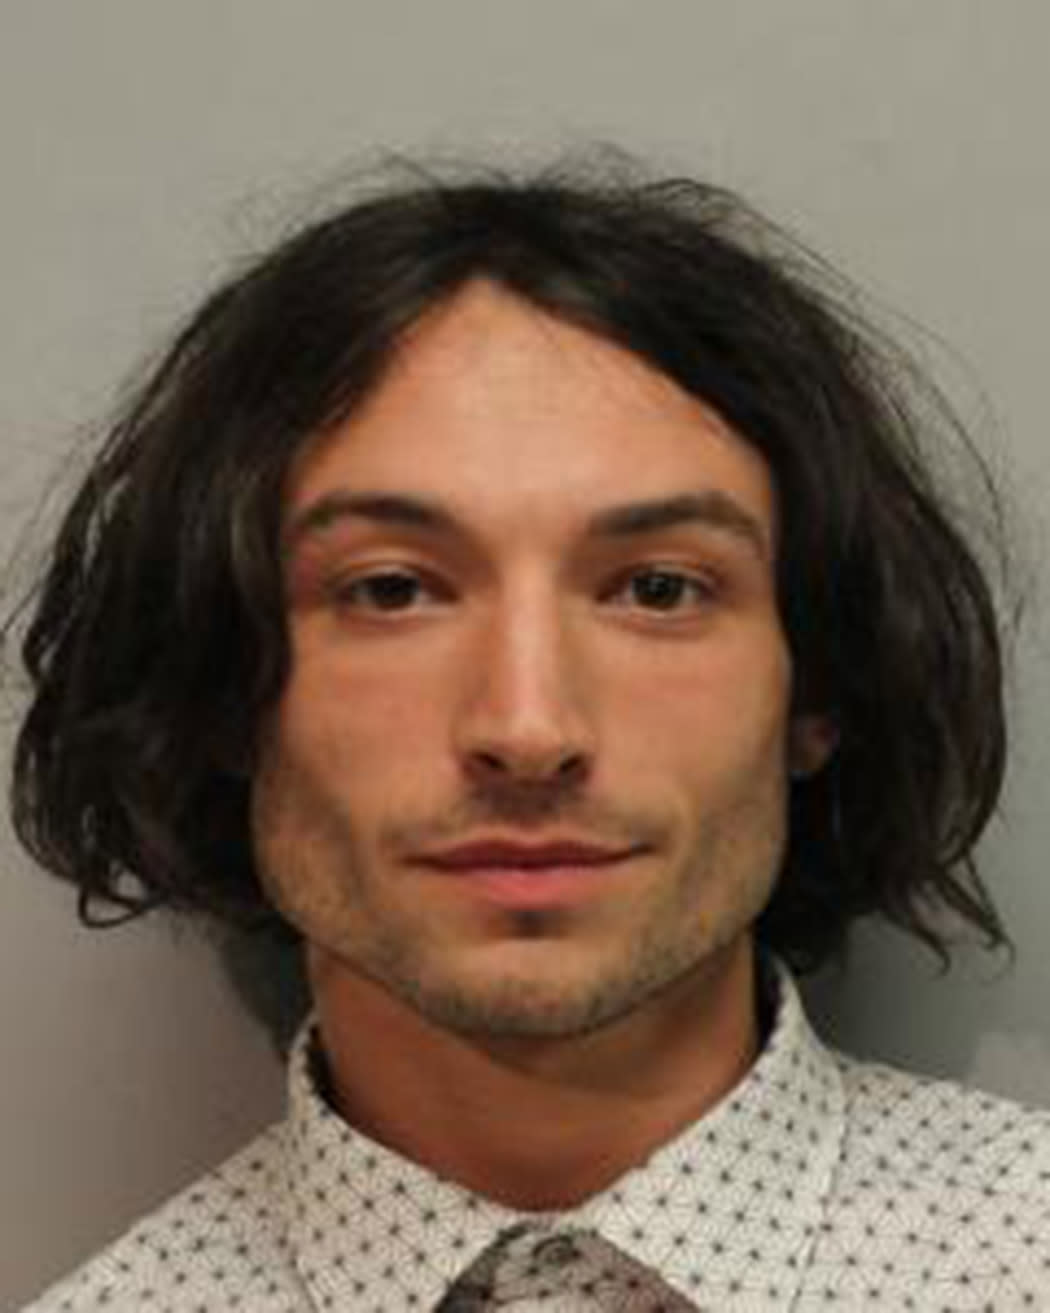 HILO, HAWAII - MARCH 28: (EDITORS NOTE: Best quality available) In this handout image provided by  Hawaiʻi Police Department, Ezra Miller is seen in a police booking photo after his arrest for disorderly conduct and harassment on March 28, 2022 in Hilo, Hawaii. (Photo by Hawaiʻi Police Department via Getty Images)